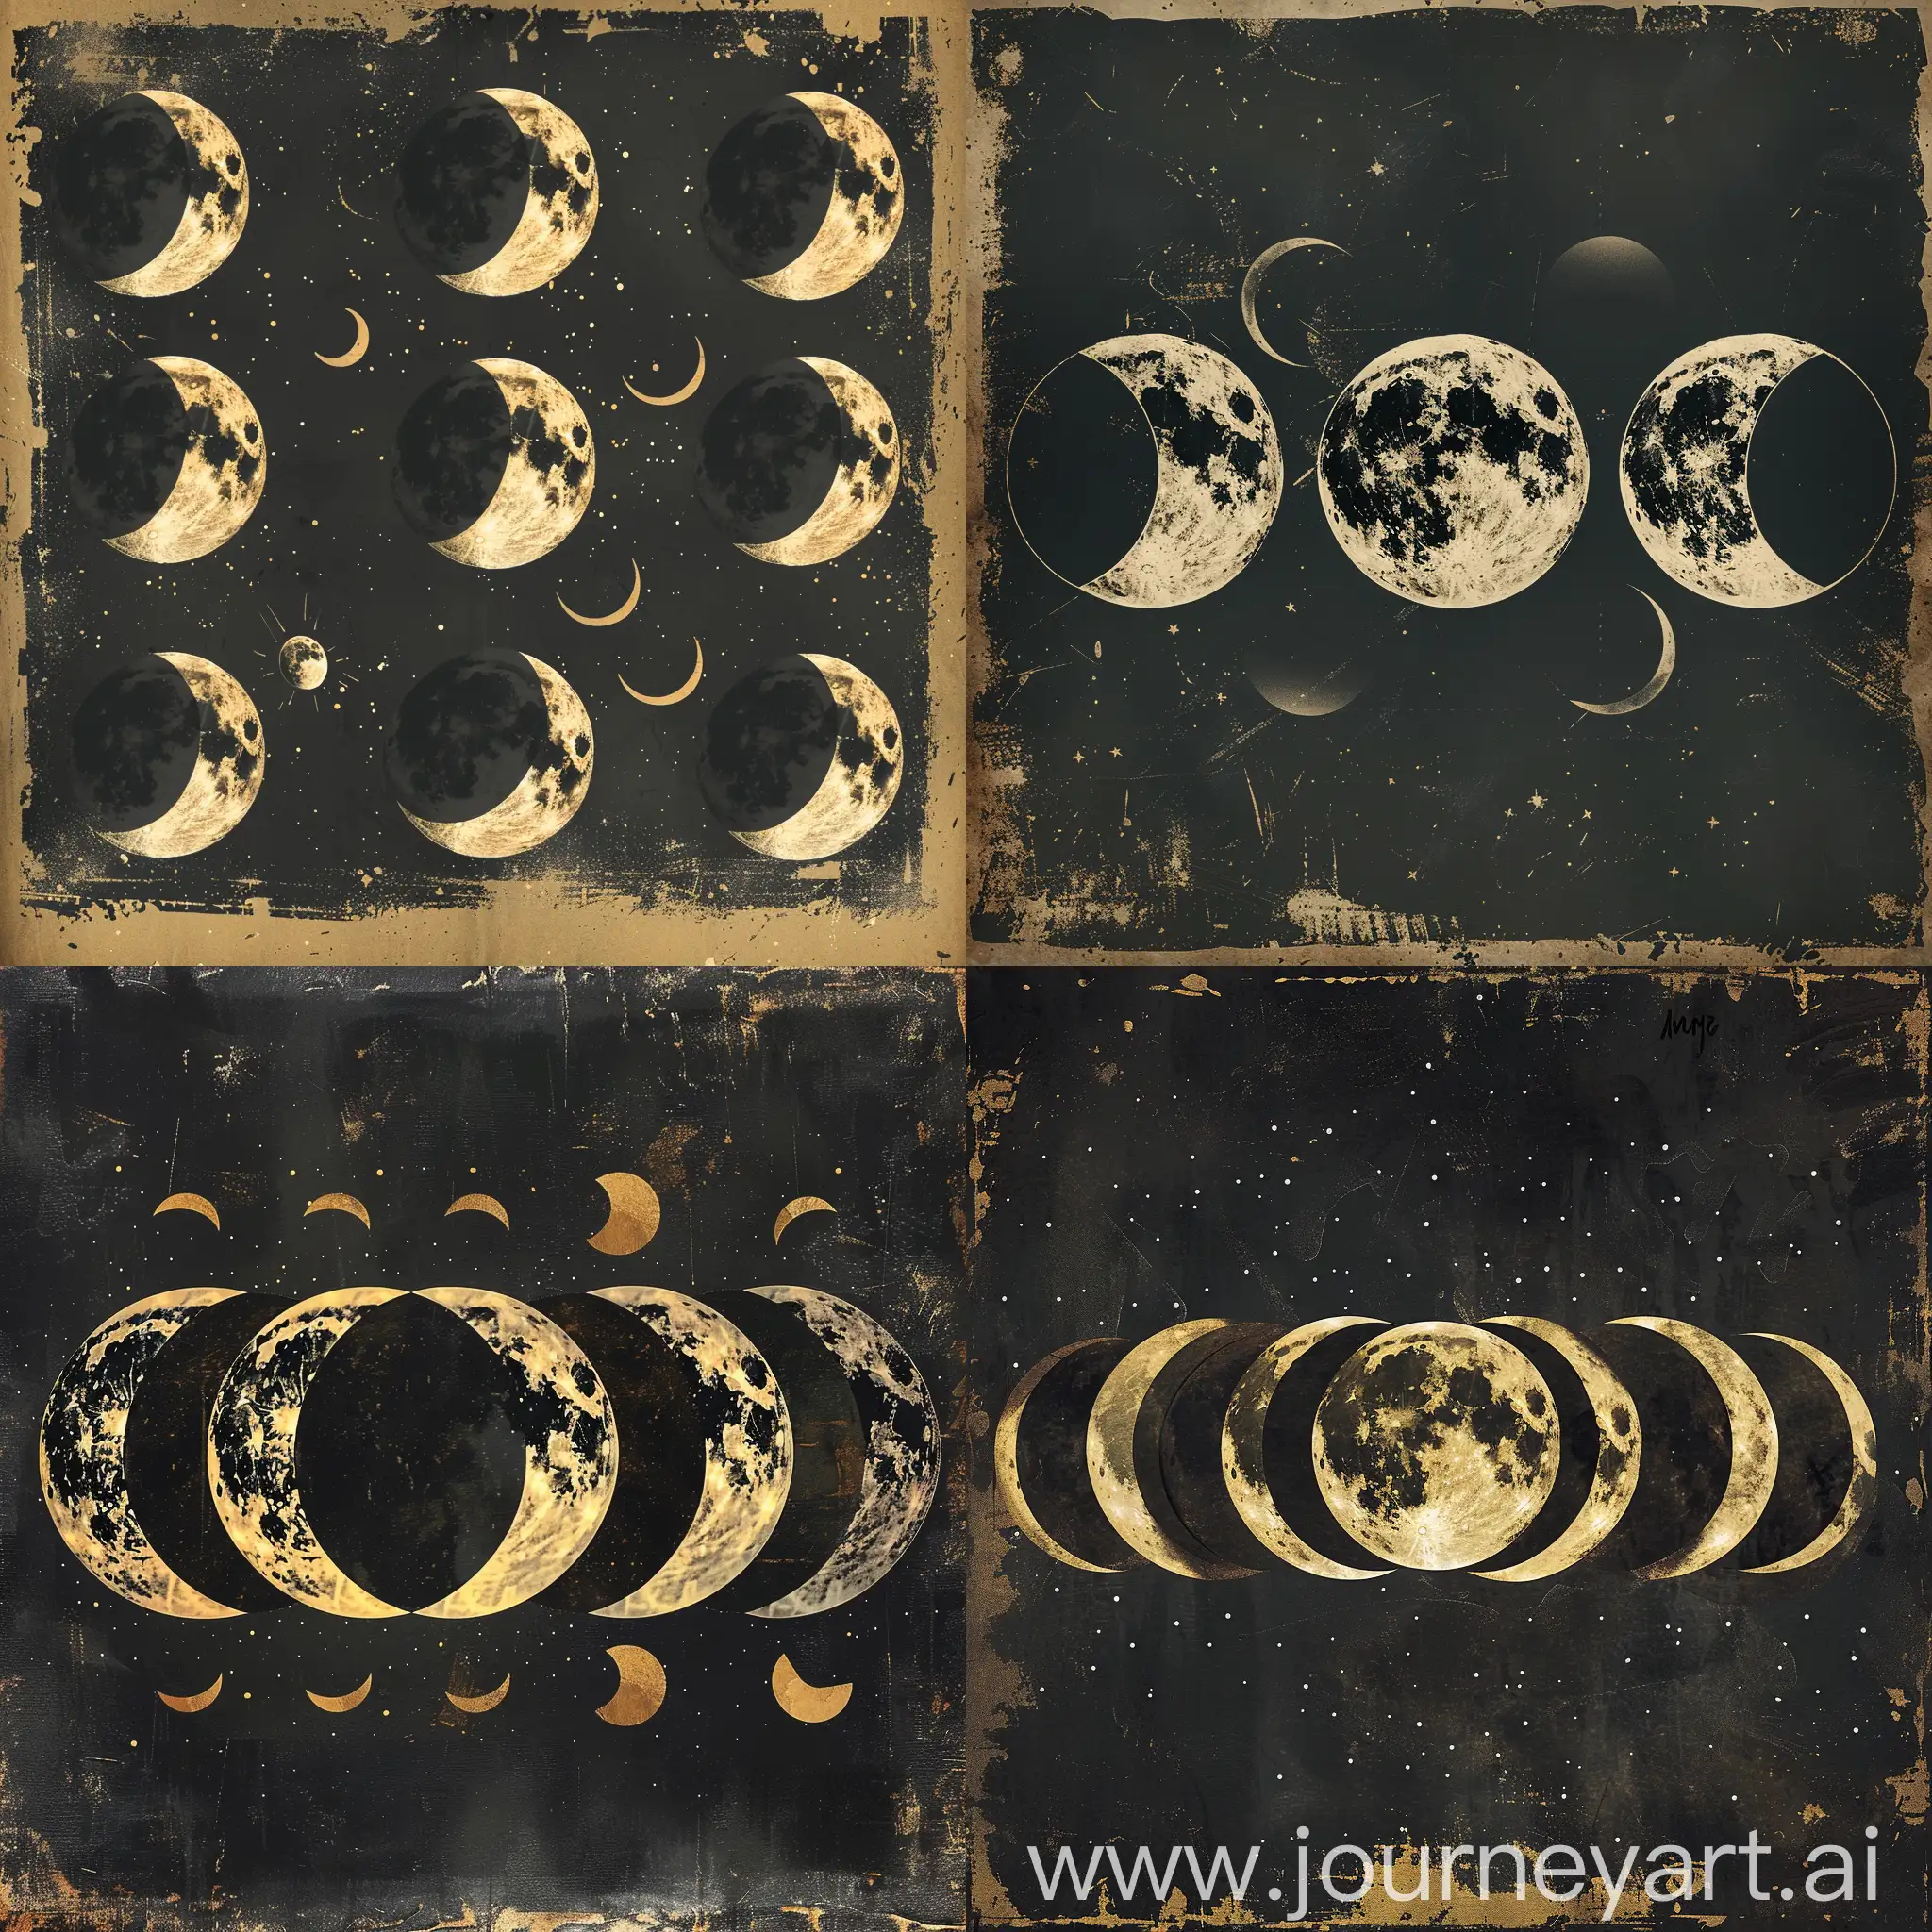 Mystic-Moon-Phases-Illustrated-in-Textured-Paper-Style